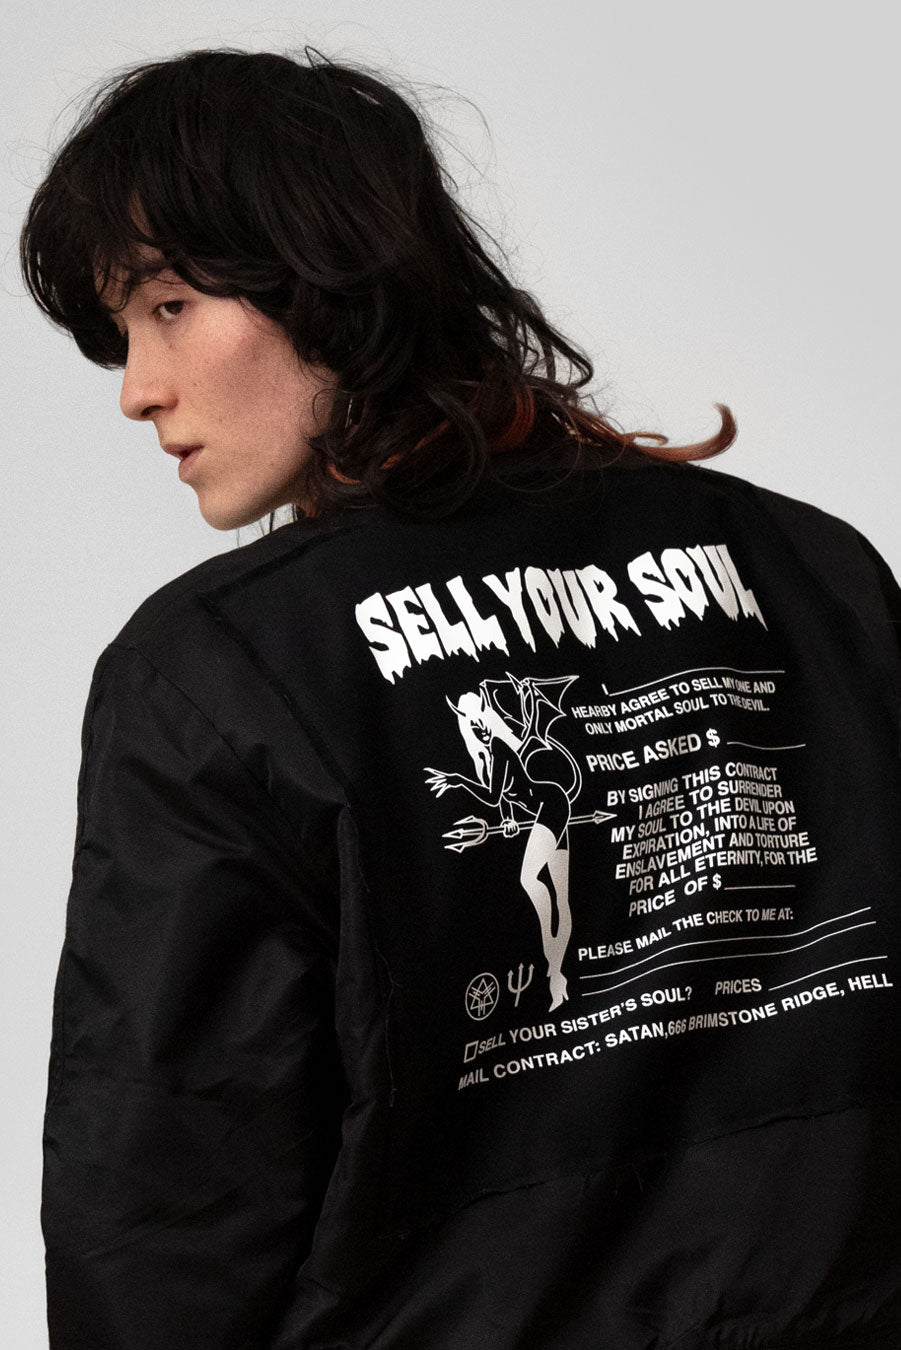 Sell Your Soul MA1 Patch Jacket